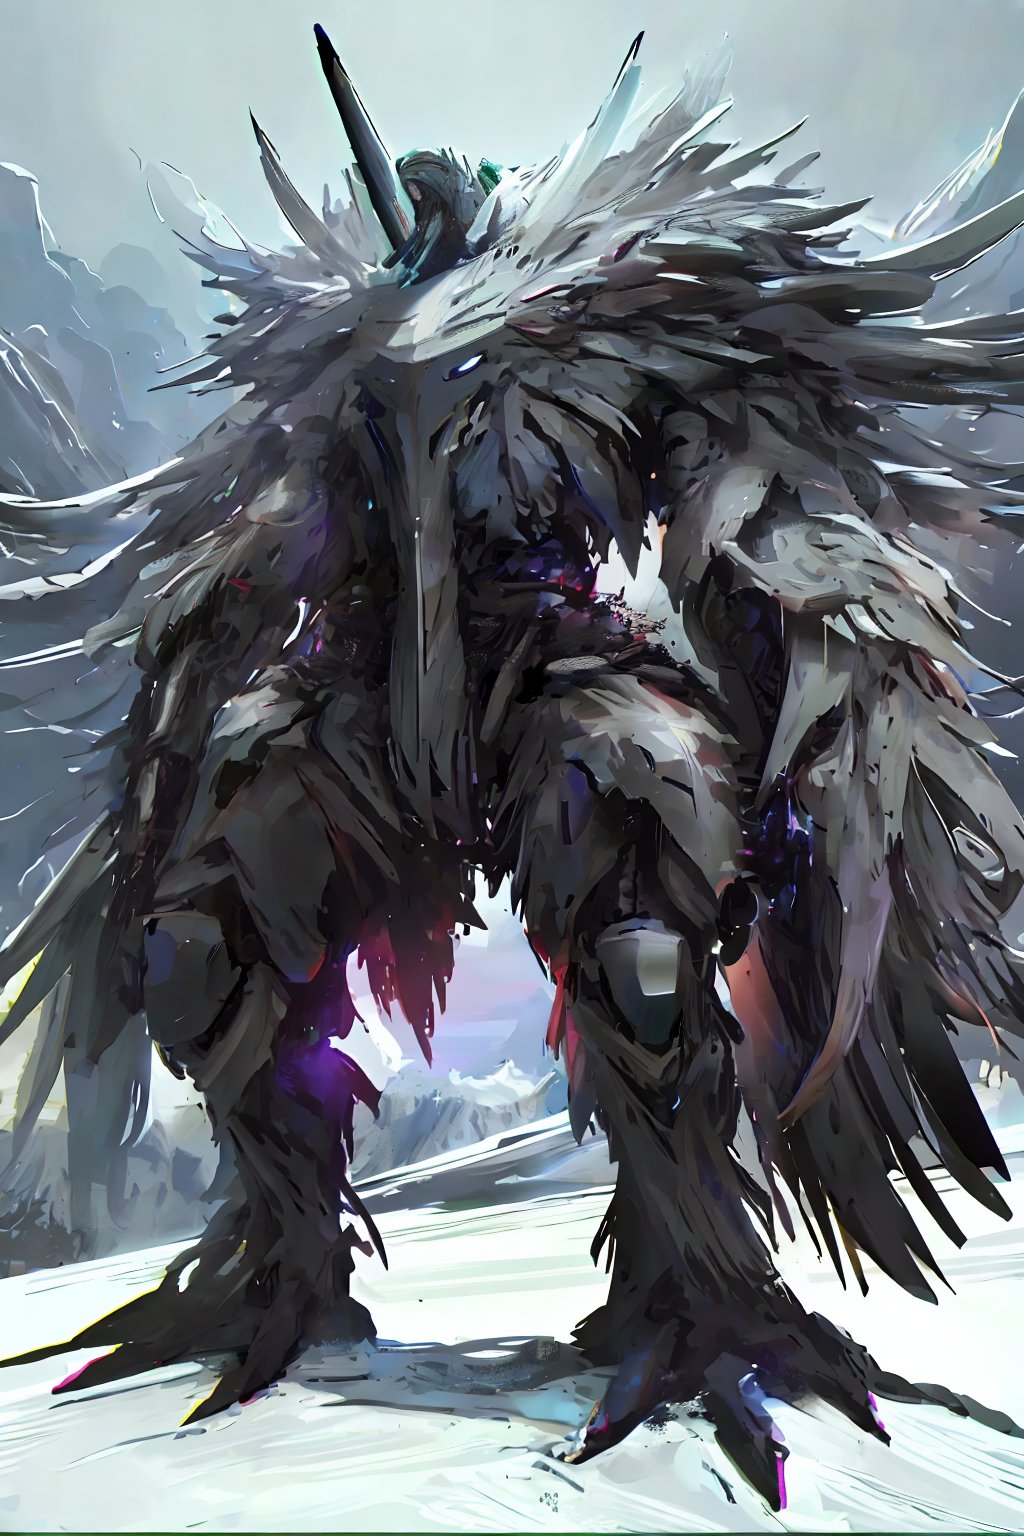 Opium bird, standing, feathers, white feathers, bird, birdman, humanoid, bird head, with extremely long beak, long beak, long mouth, full body, bird legs, bird arms, sinister, terrifying, beautiful , ragged, wide body, fat

High quality, HD, 4kHD, cinematic, atmospheric, realistic, ultra-realistic
snow, mountain, cloudy, gray sky, dark clouds
Detail,lora:largebulg1-000012:1,AIDA_NH_humans,hand,DonMW15p,LEGO,lego